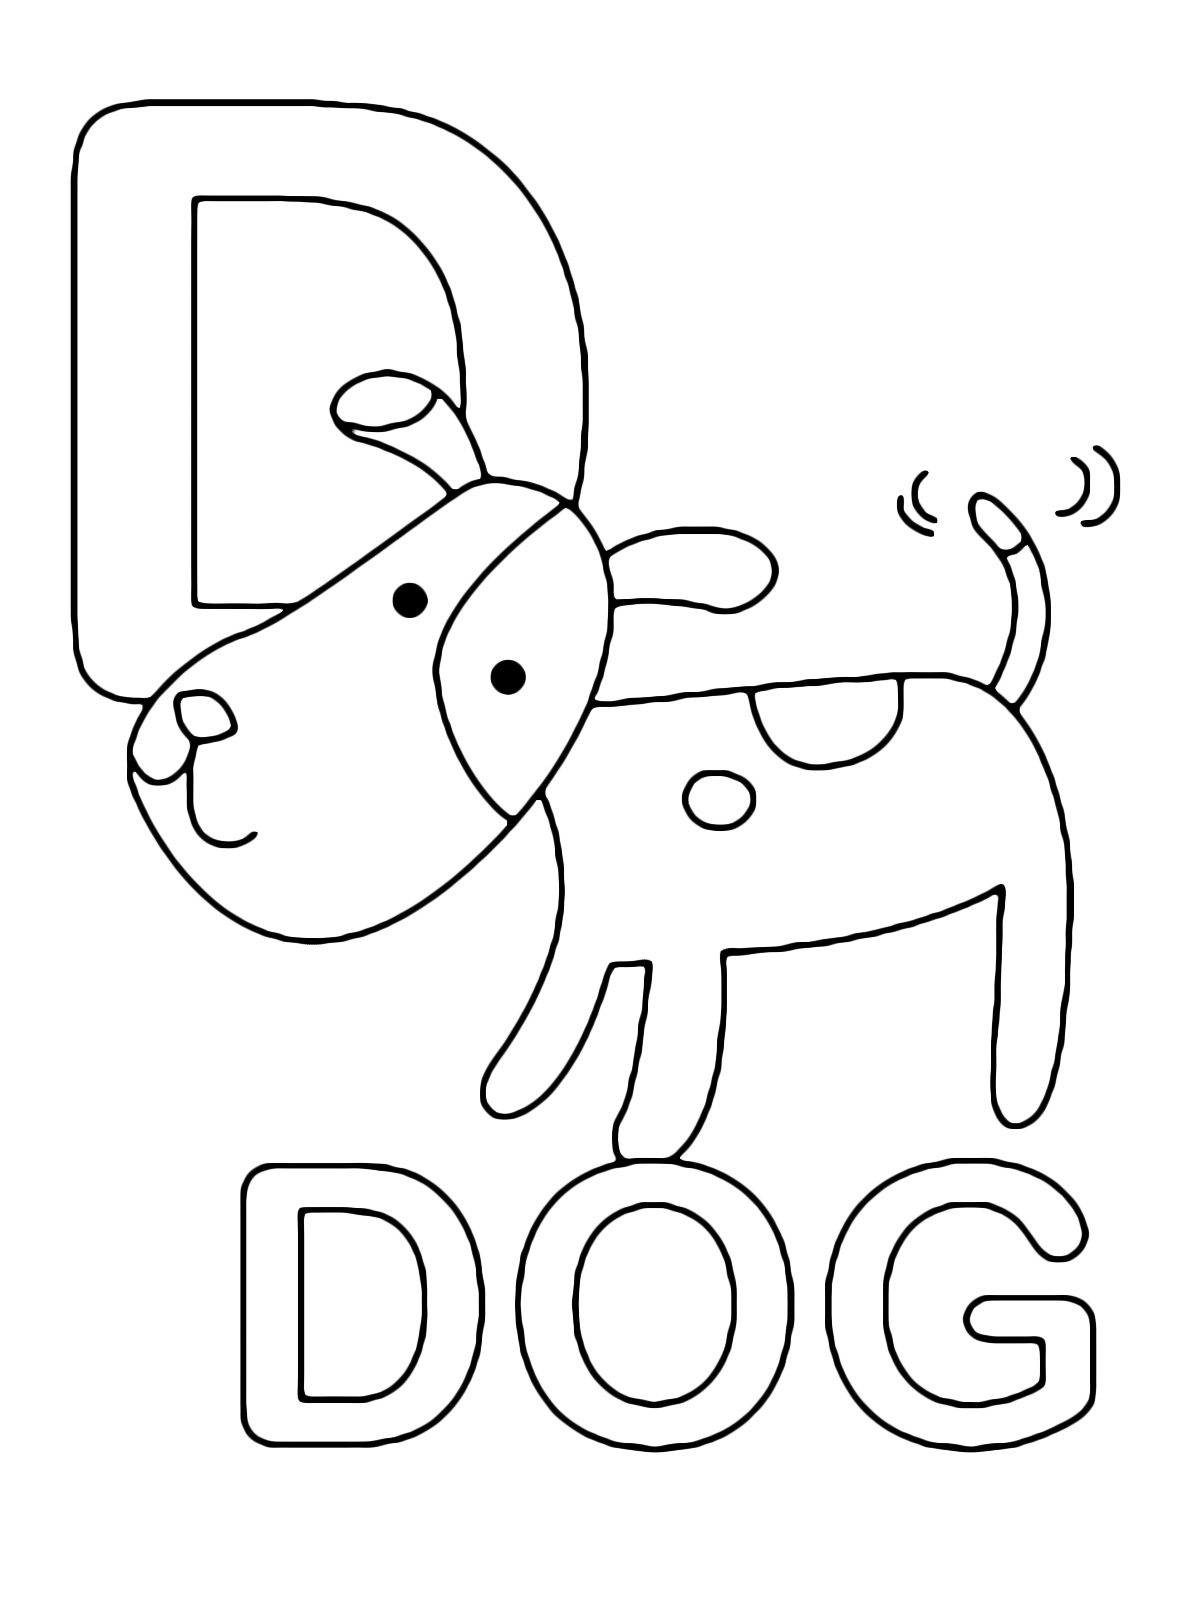 Download Letters and numbers - D for dog uppercase letter